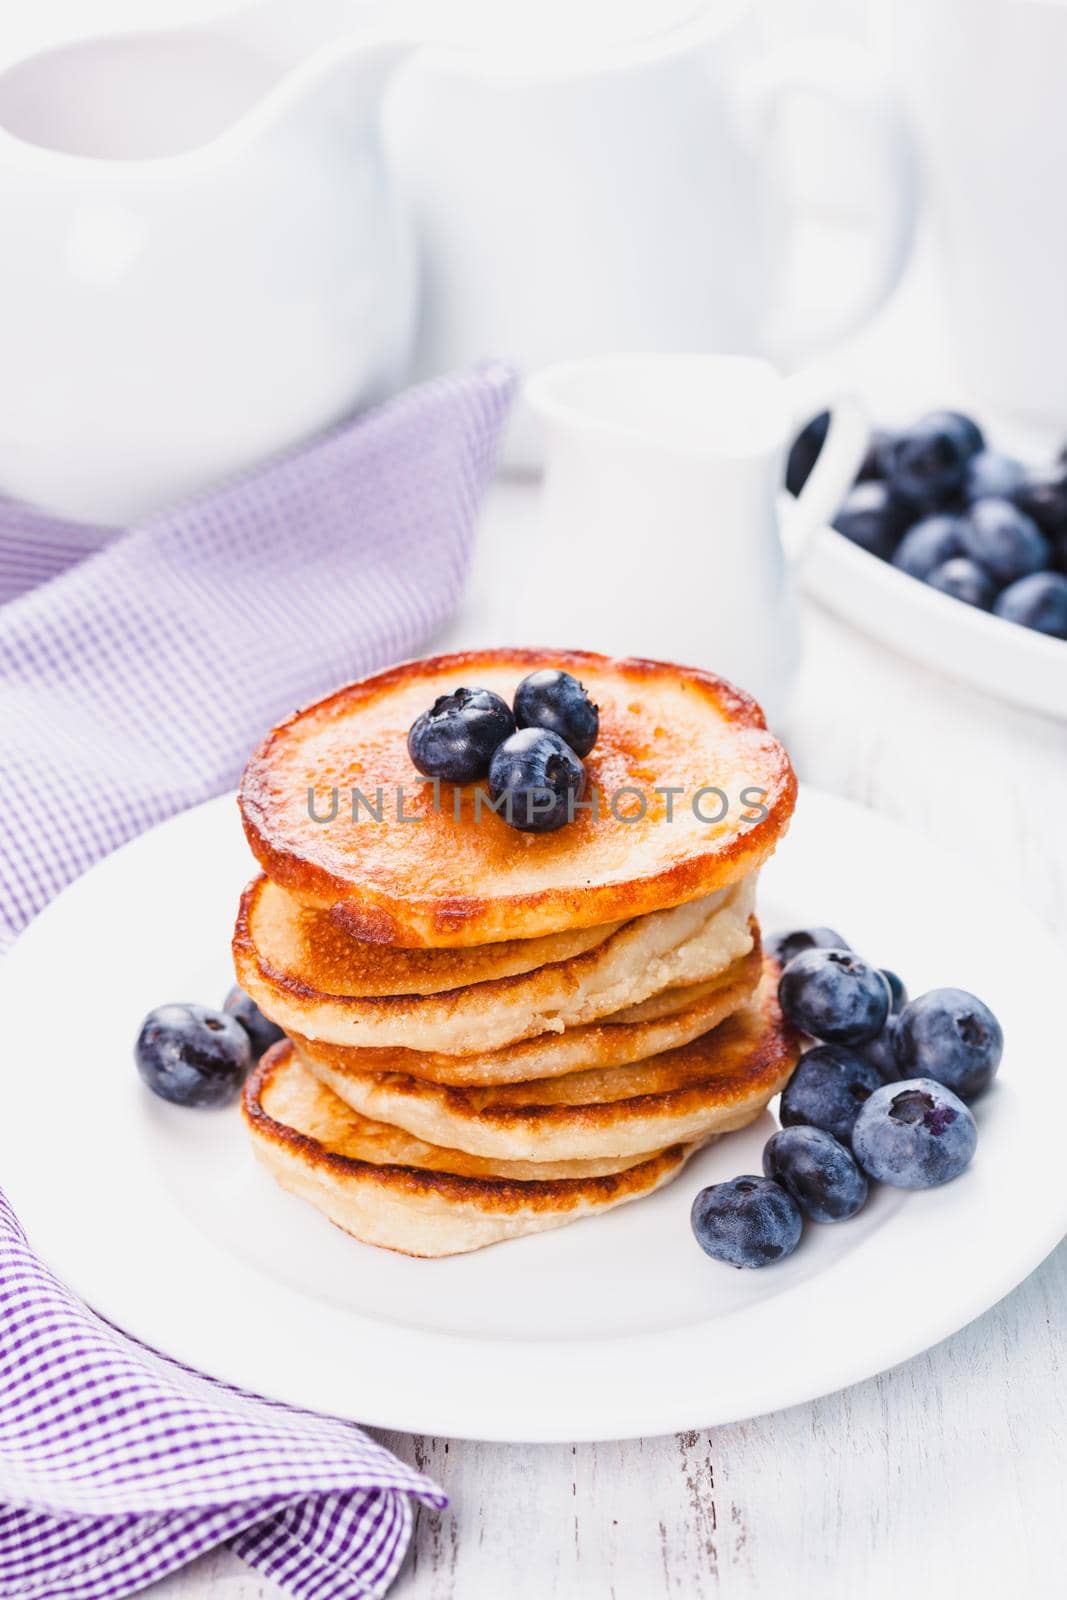 Pancakes with blueberry by oksix